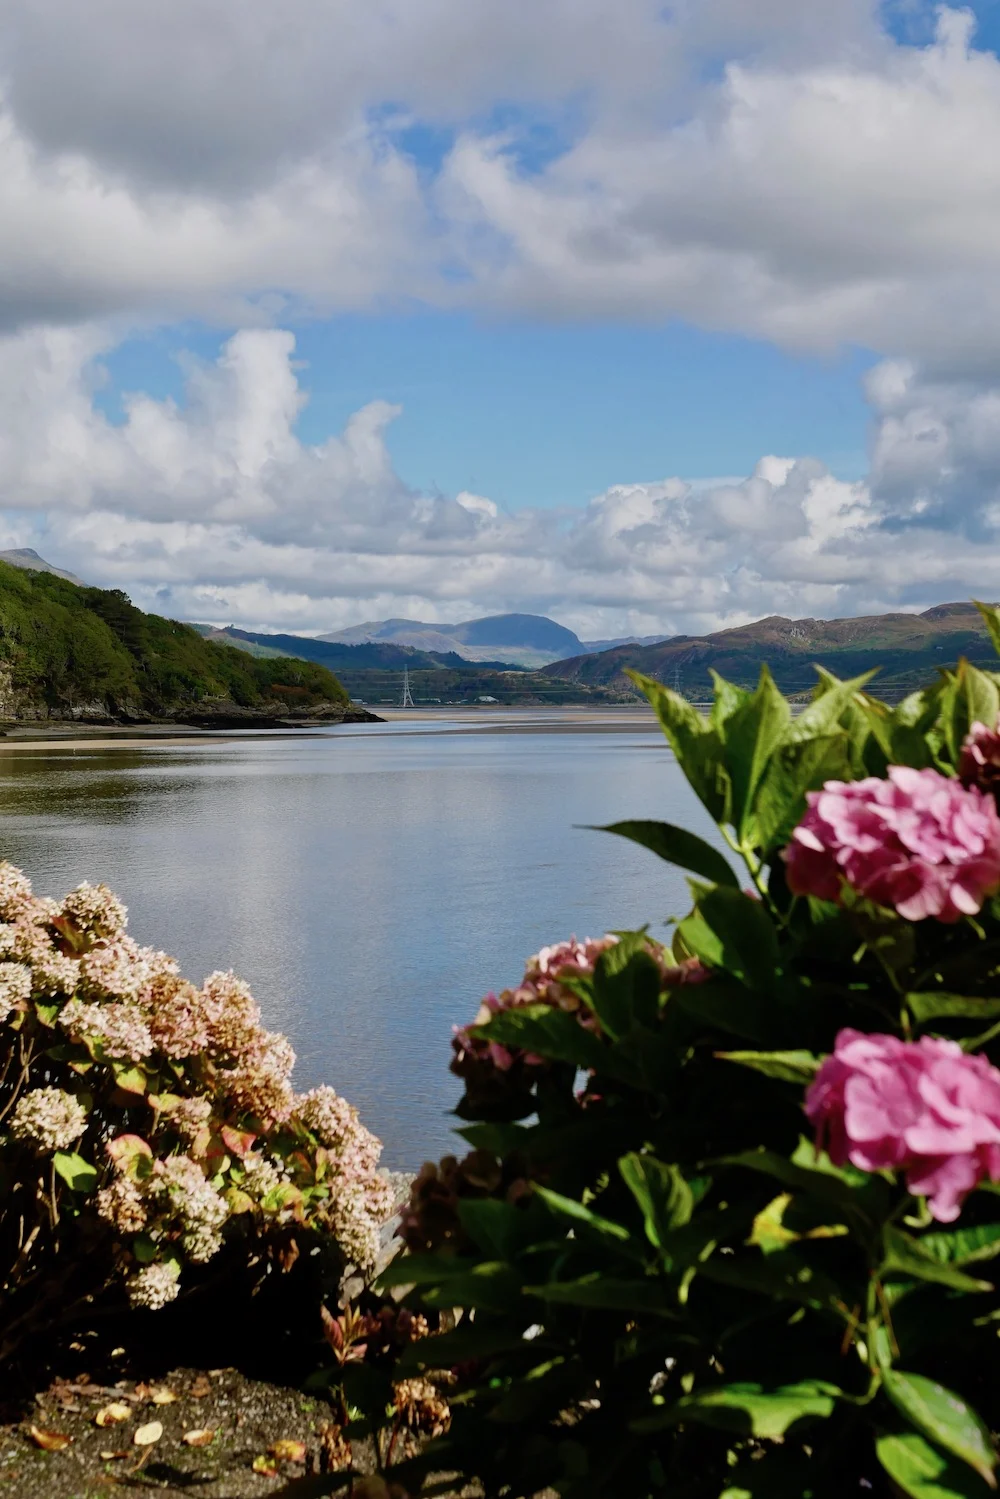 Views from Portmeirion